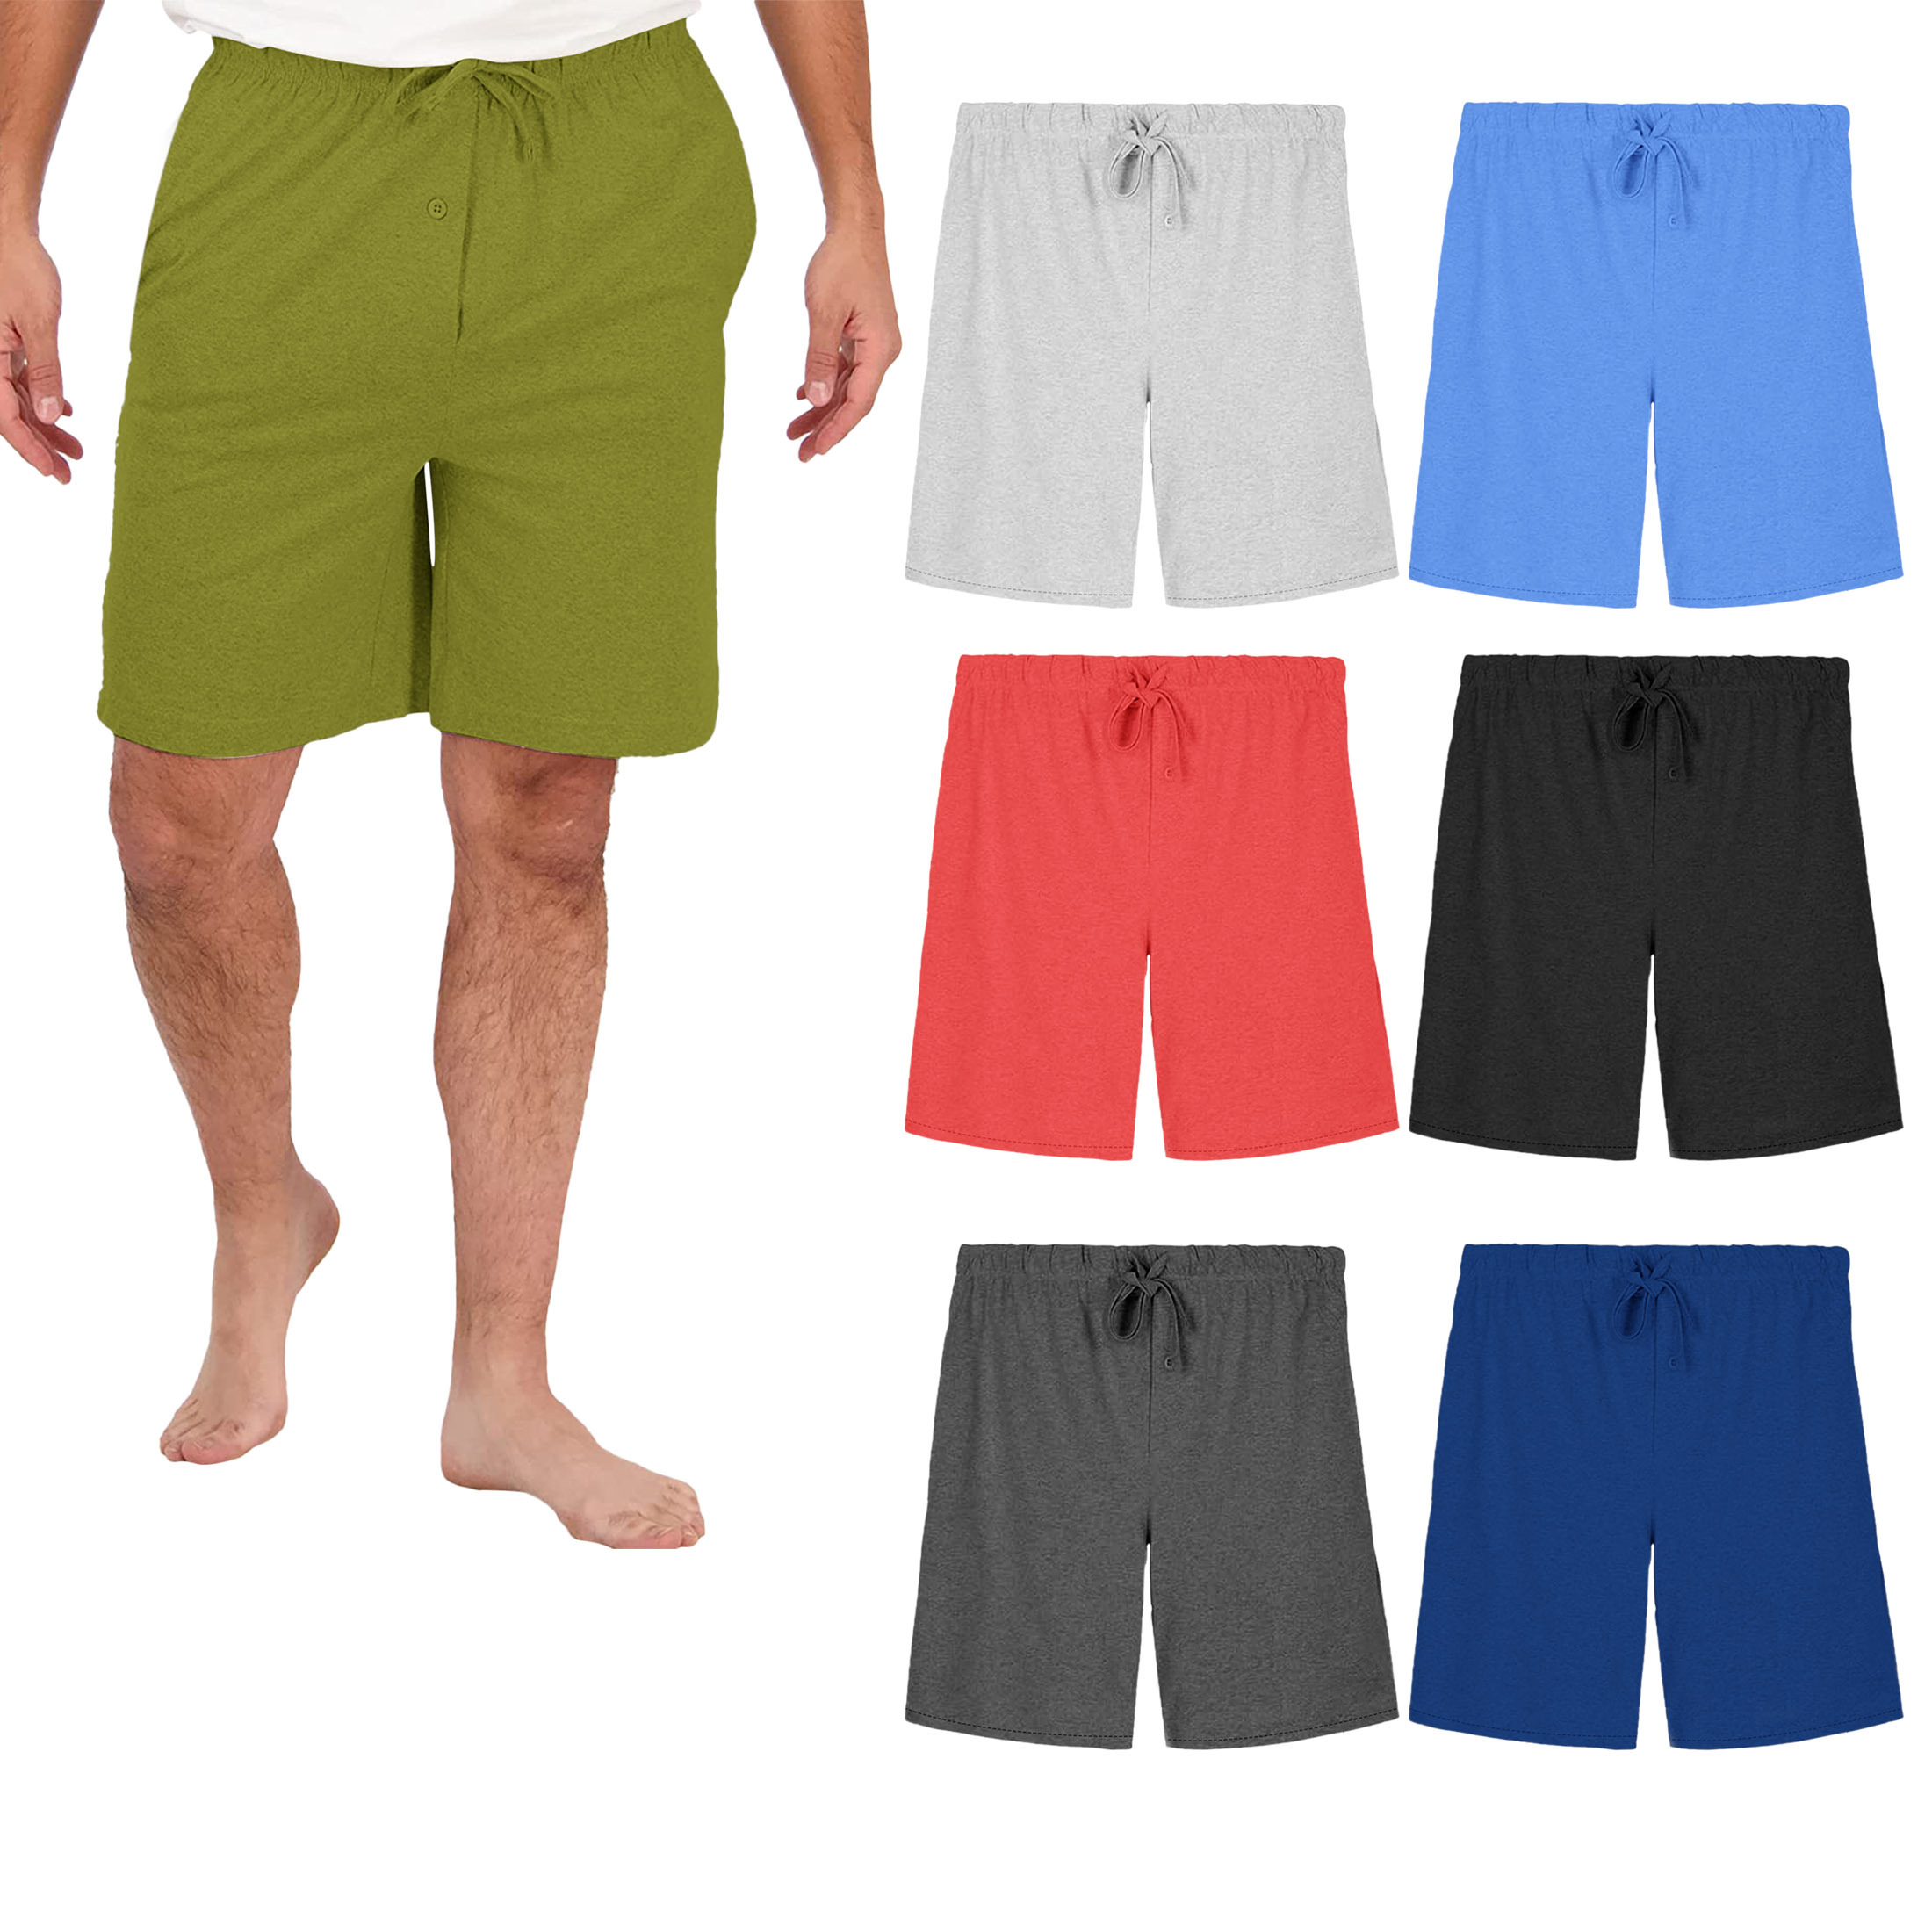 4-Pack Men's Solid Jersey-Knit Tech Shorts Soft Casual Athletic Relaxed Fit Lounge Performance Bottom Pants - M